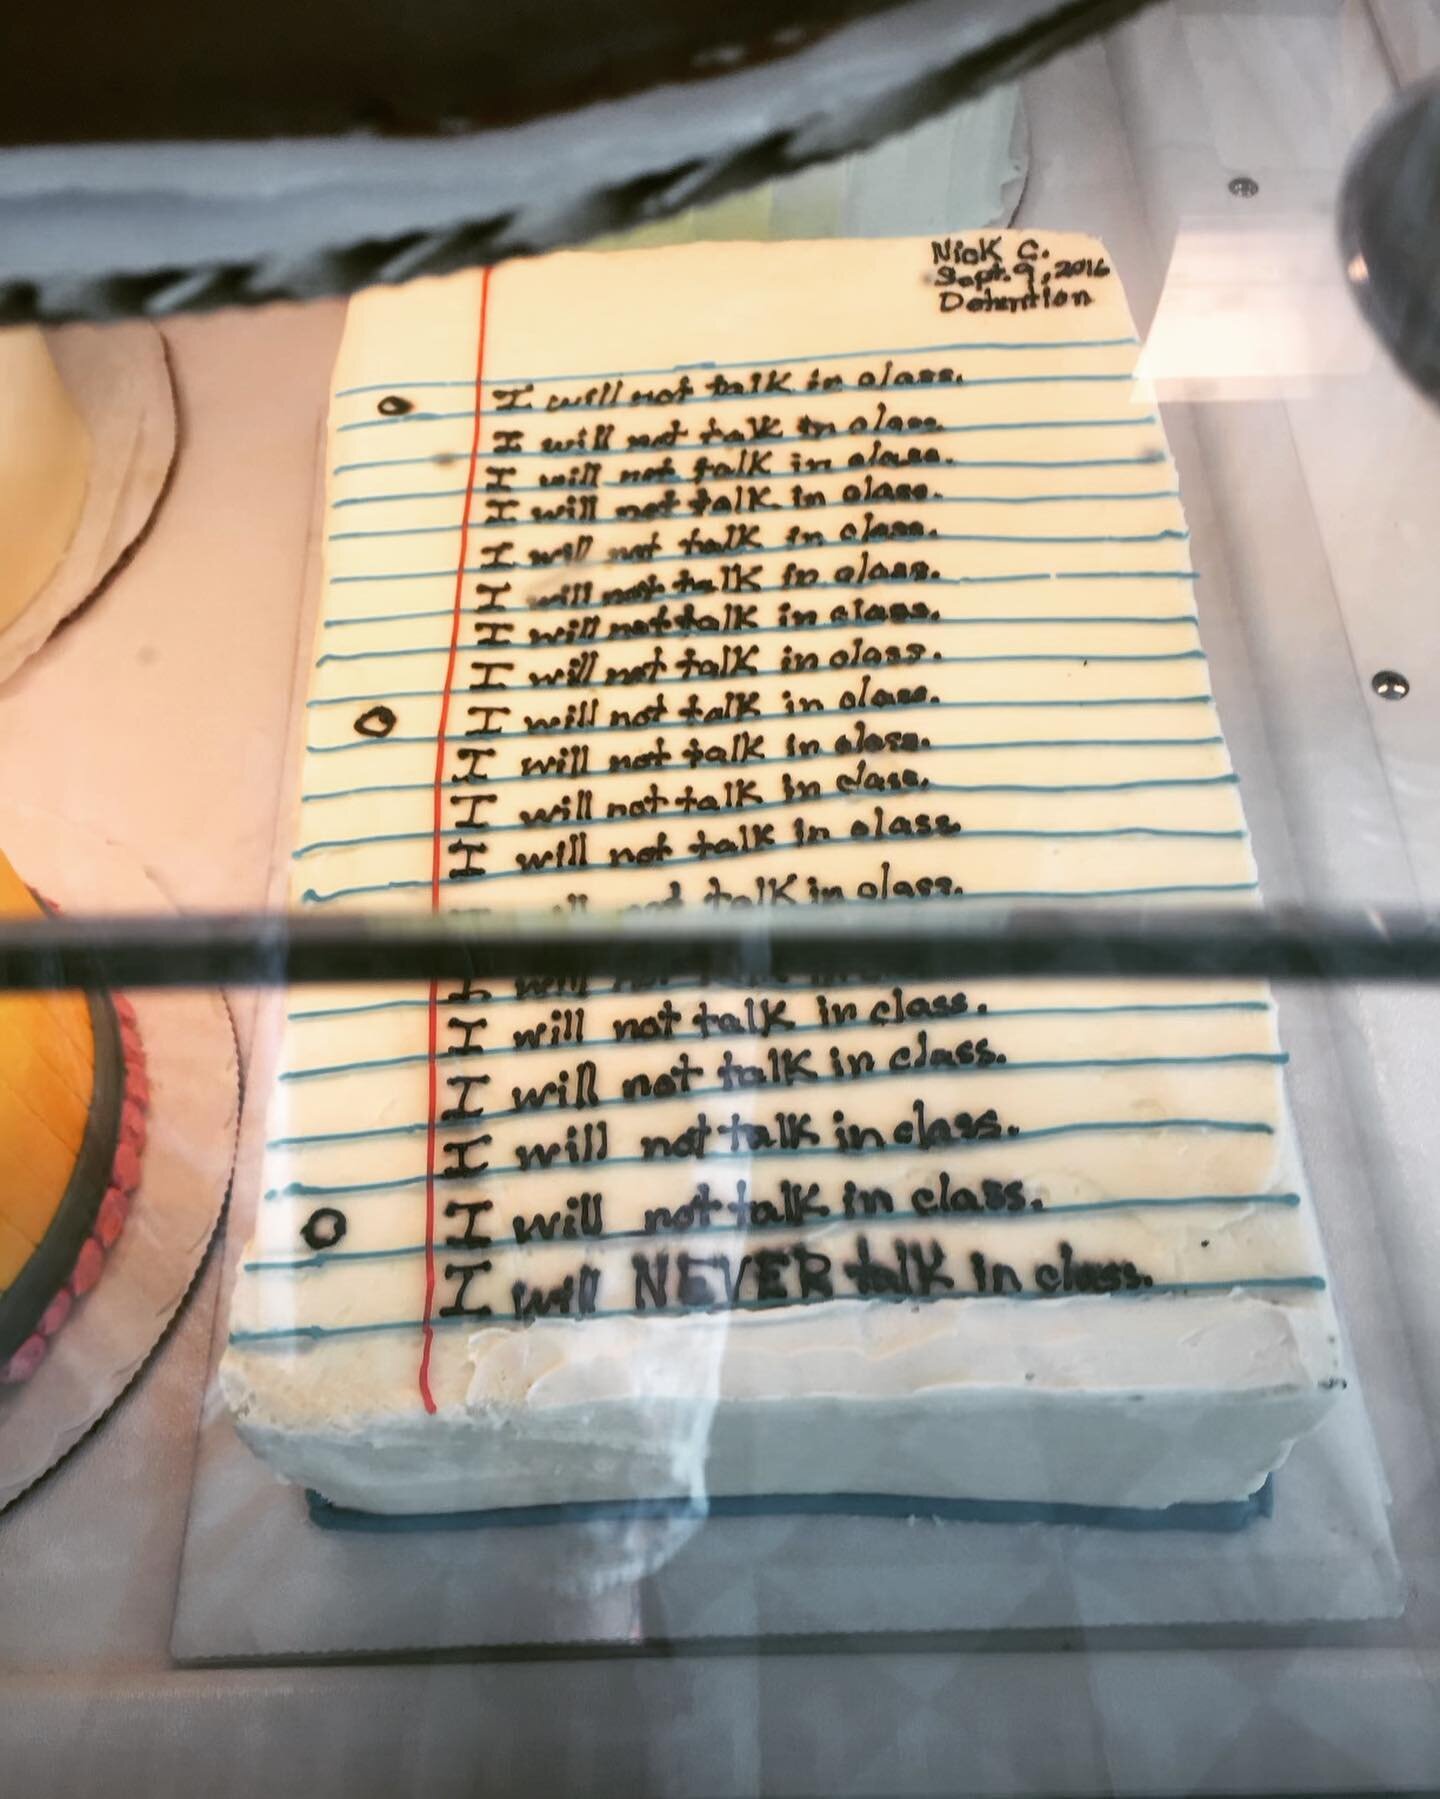 In honor of National Cake Day, check out this cake recently spotted at a Gelsons bakery in Los Angeles. This kid knows what&rsquo;s up.

#nationalcakeday #cake #art #edibleart #adamgreener #agreener #adamgilchrist